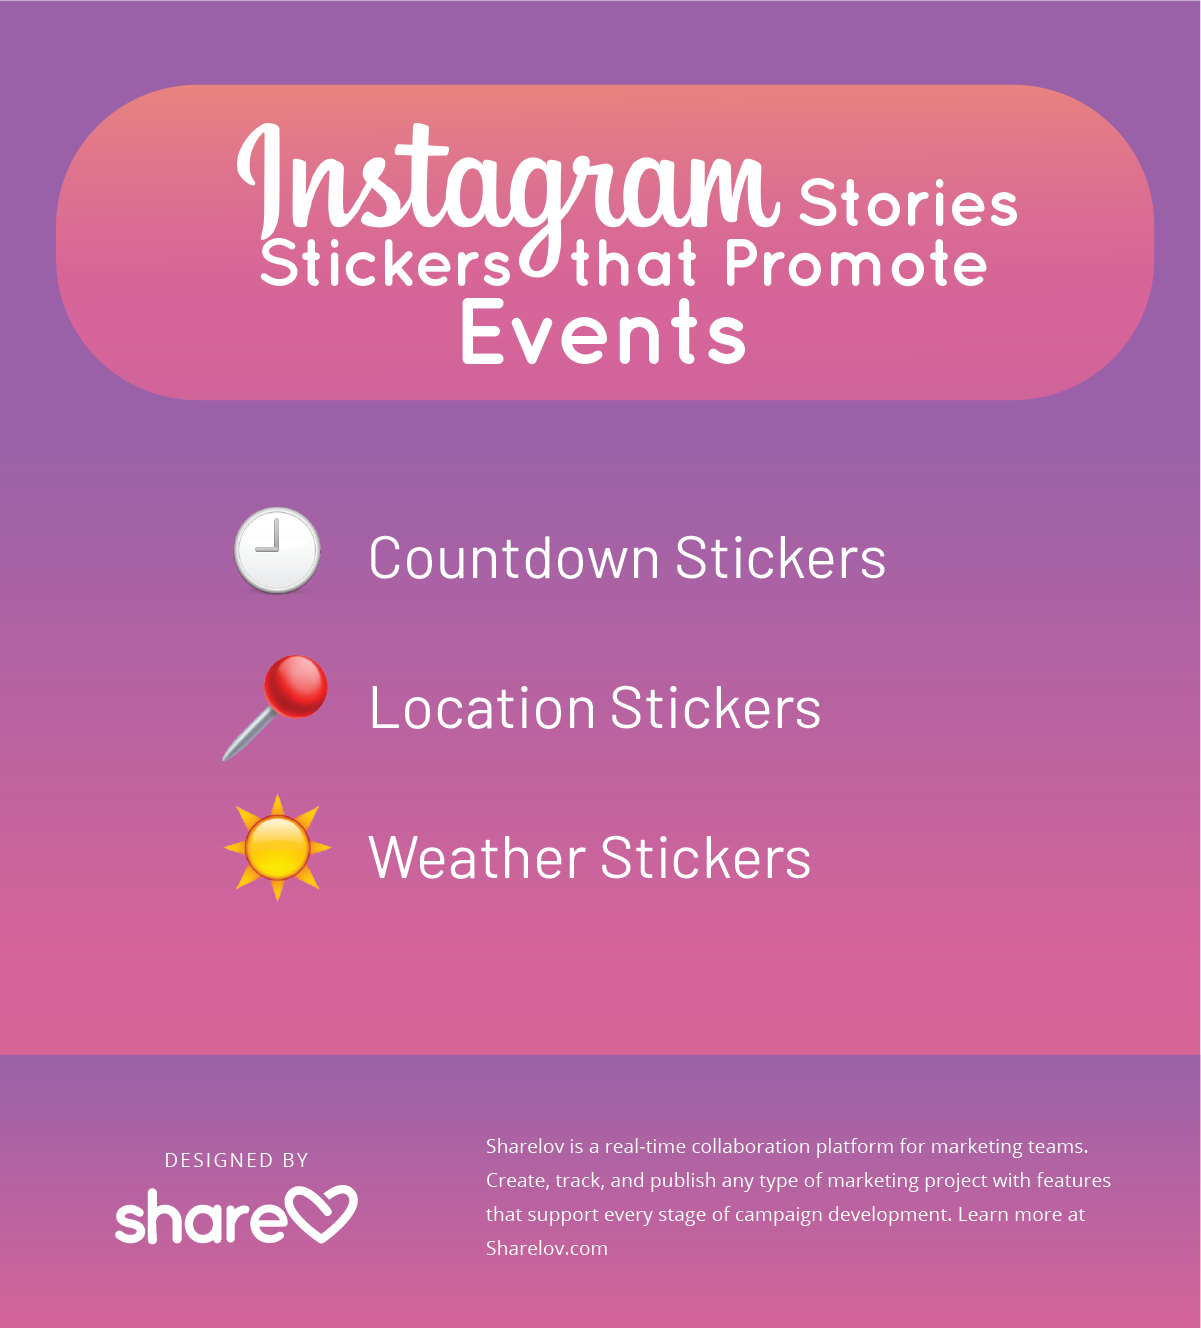 Instagram Stories Stickers that Promote Events